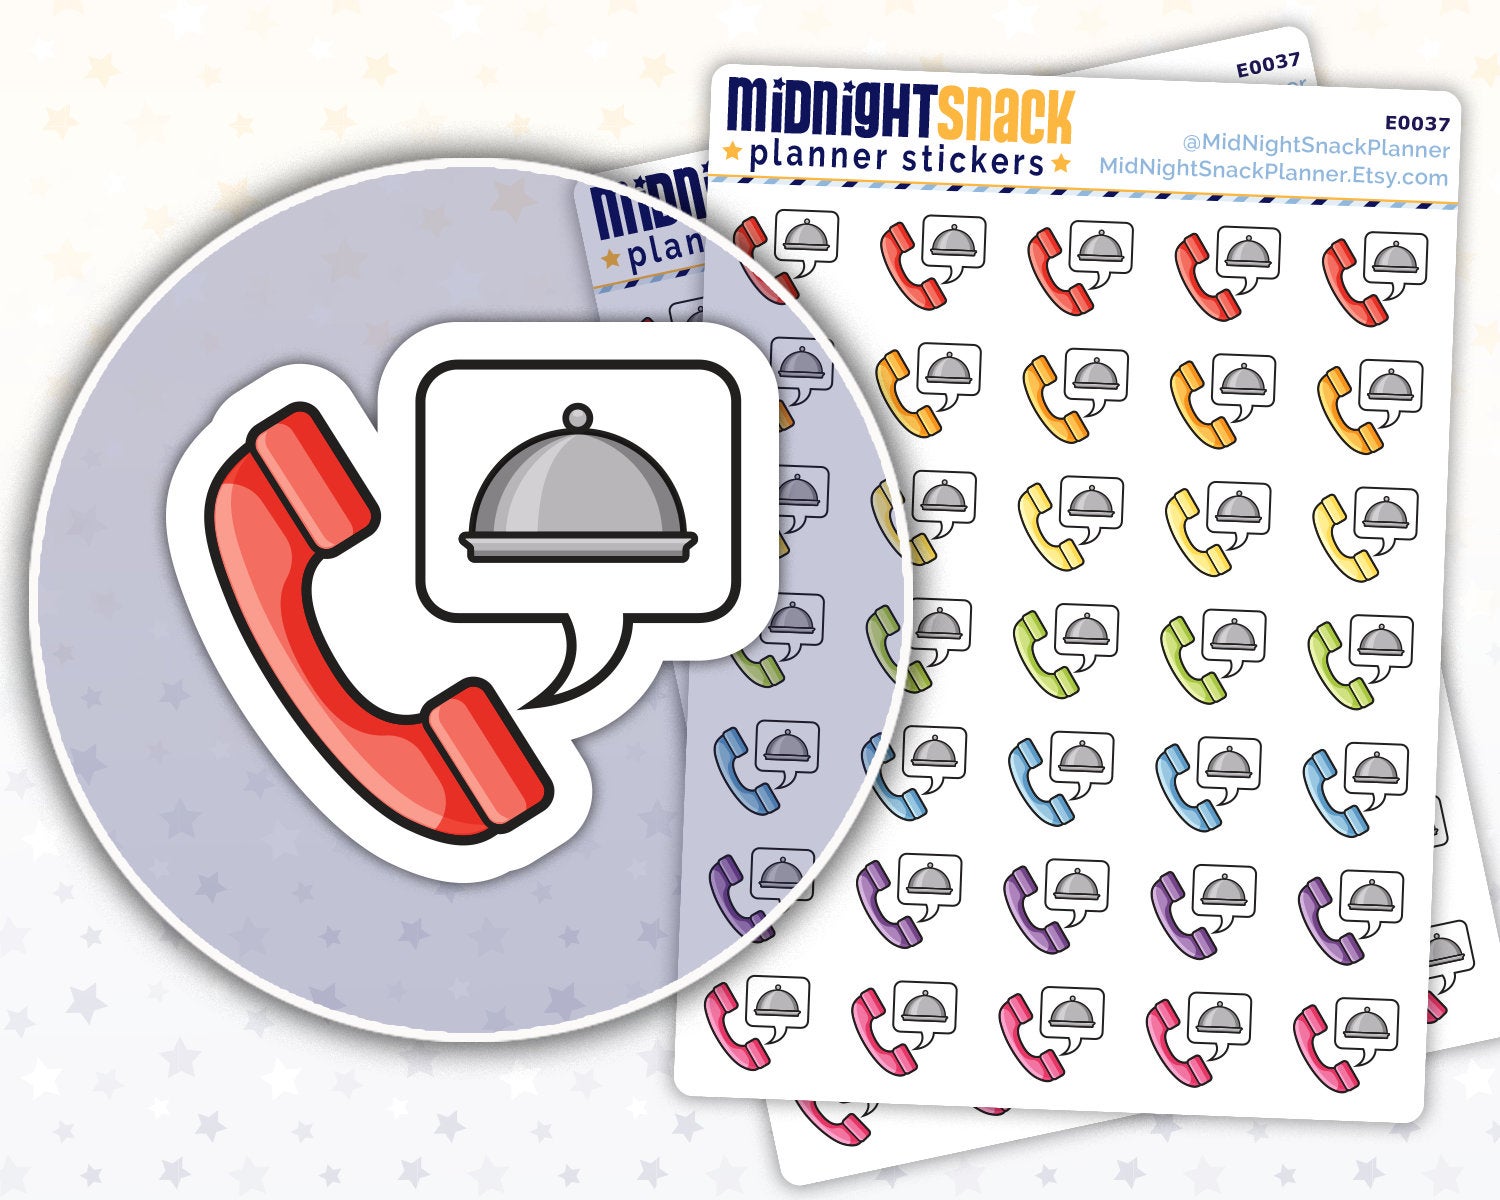 Order Food Icon: Food Delivery Planner Stickers Midnight Snack Planner